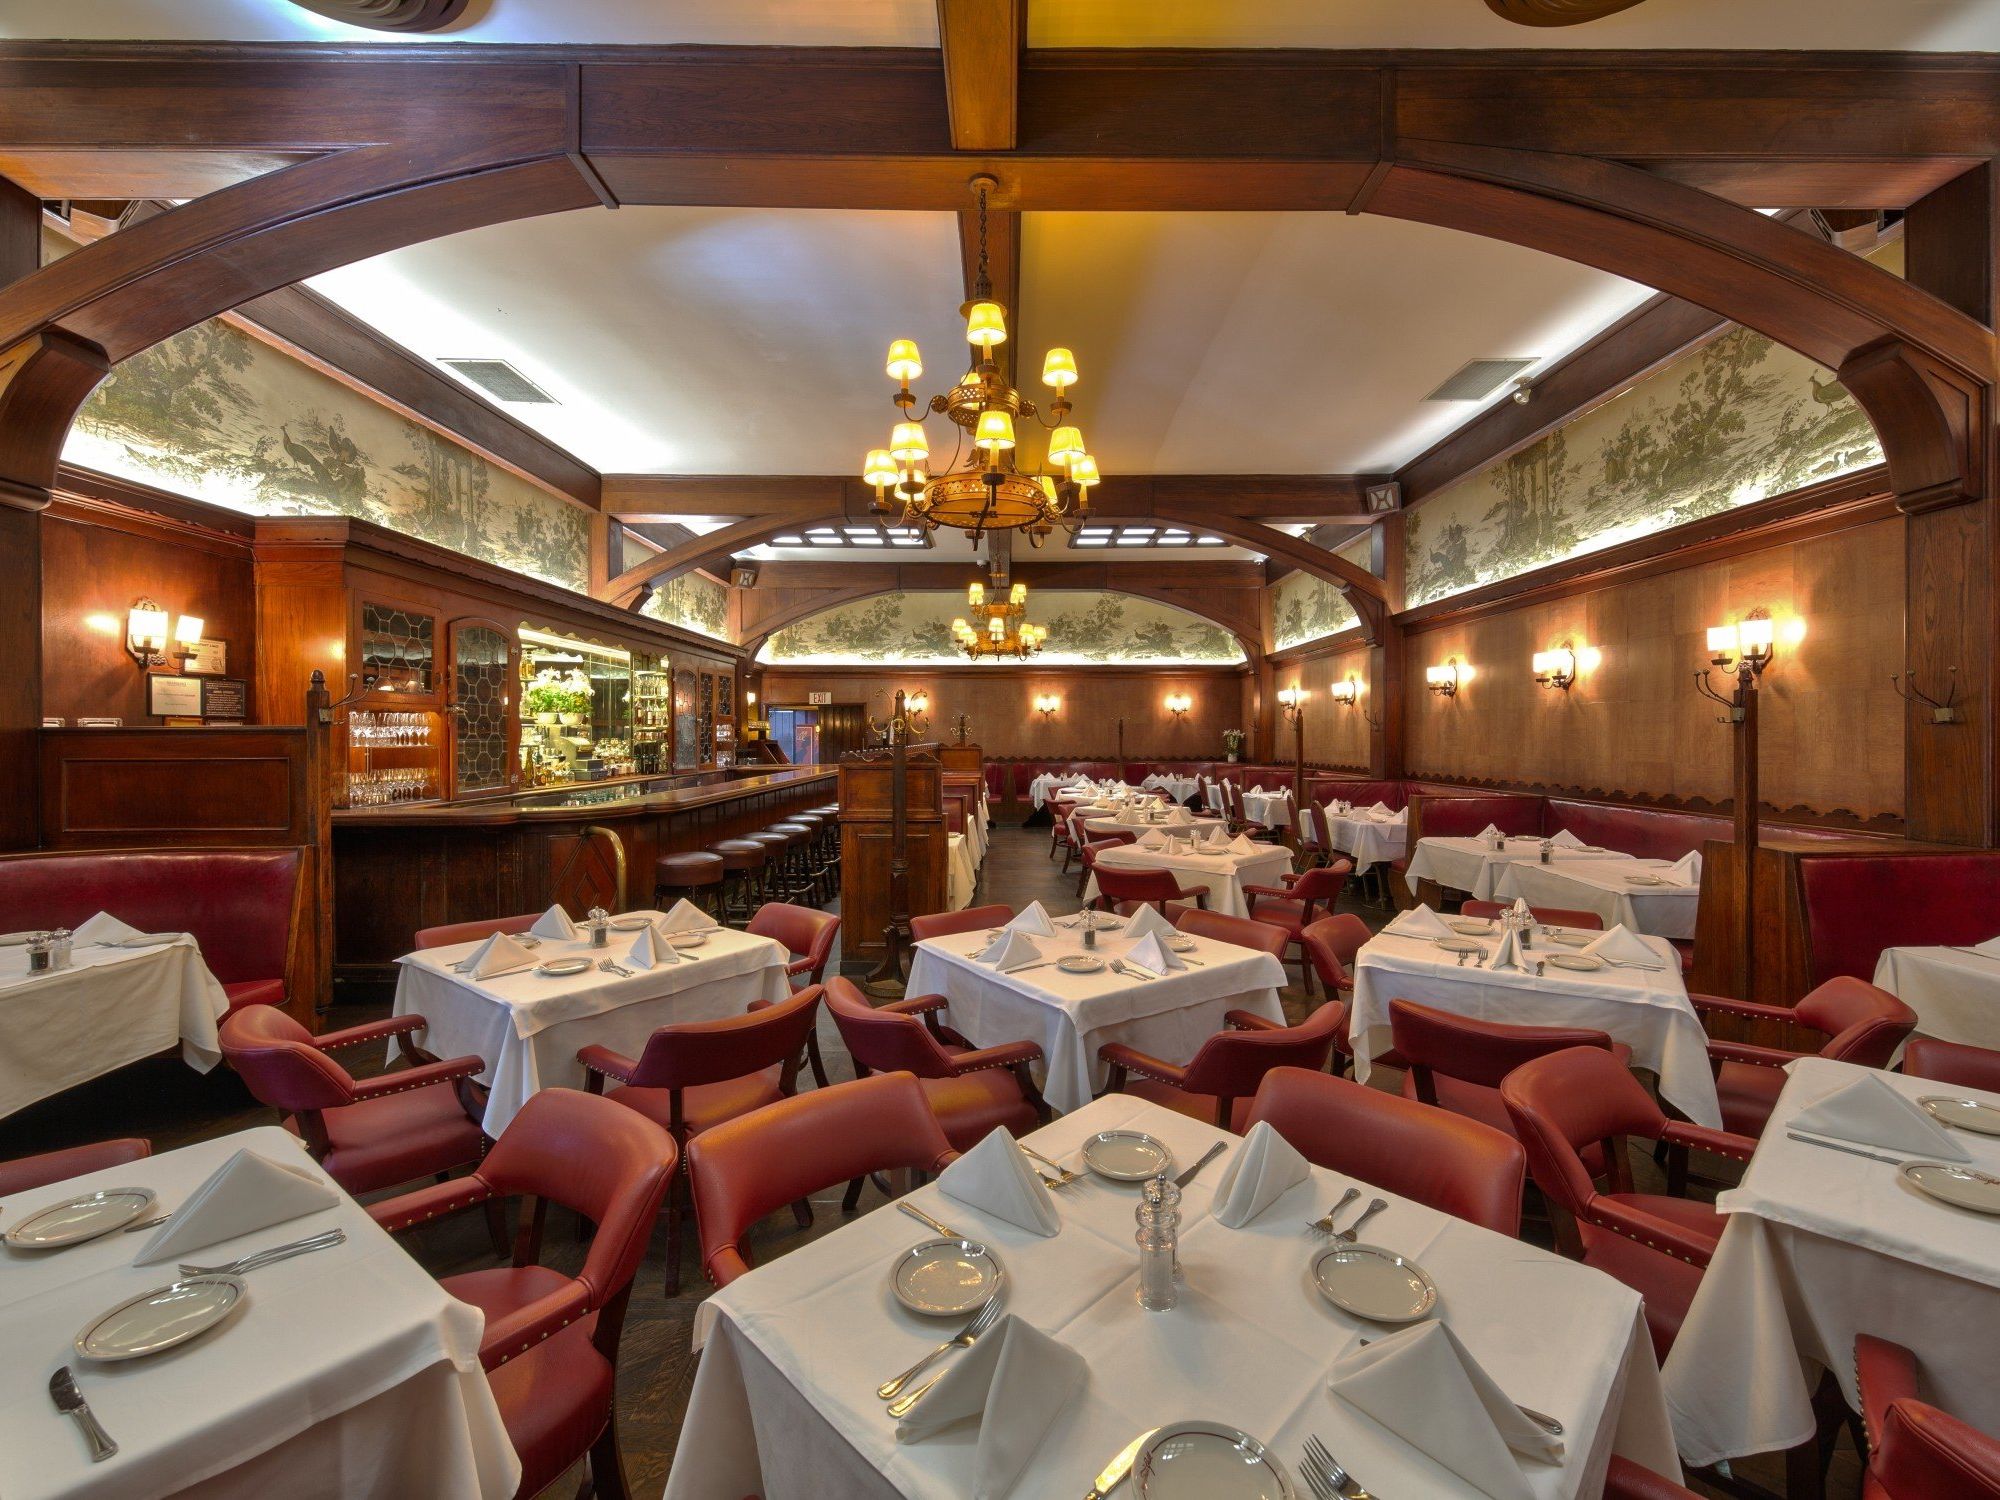 Musso Frank's Reopens, with Changes - dot.LA